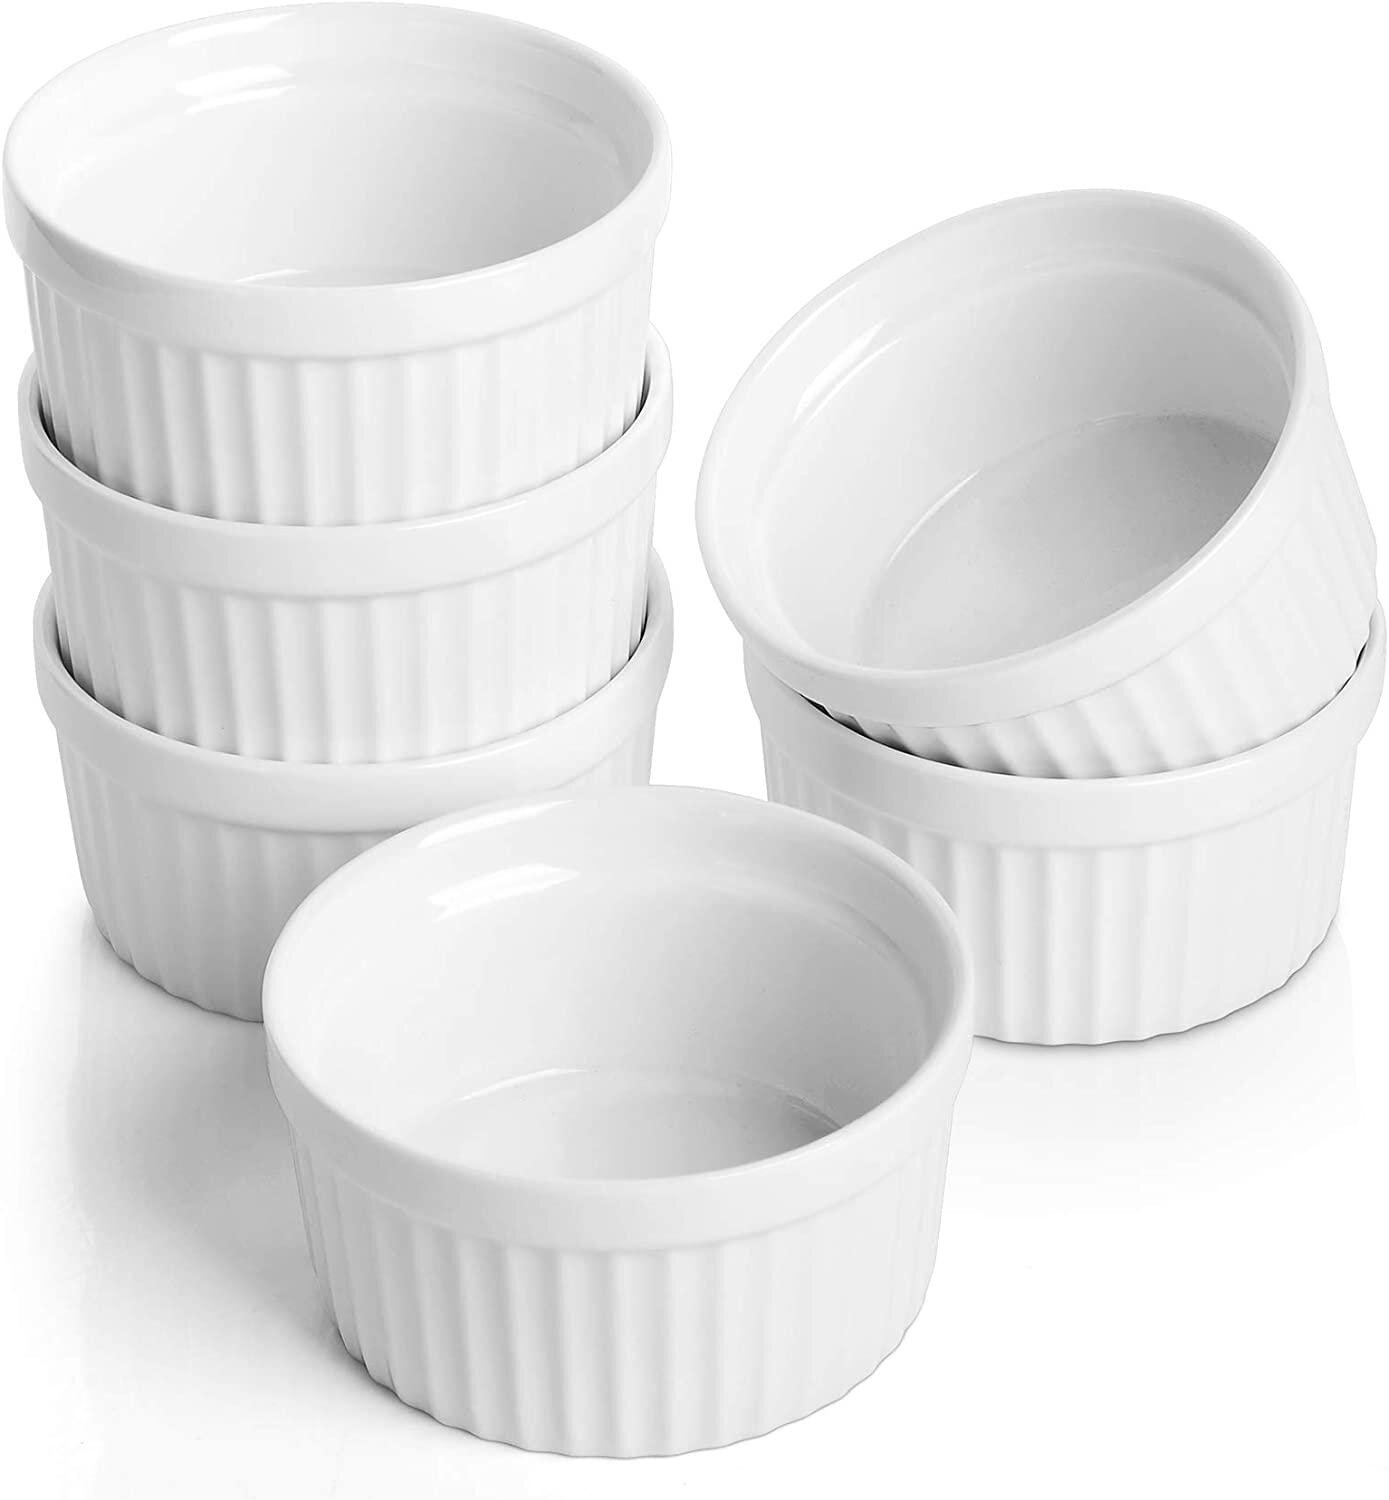 10 Ounce Oval Ceramic Creme Brulee Souffle Baking Ramekin Dishes Bowl with Double Handles Foraineam 6-Pack Porcelain Ramekins 